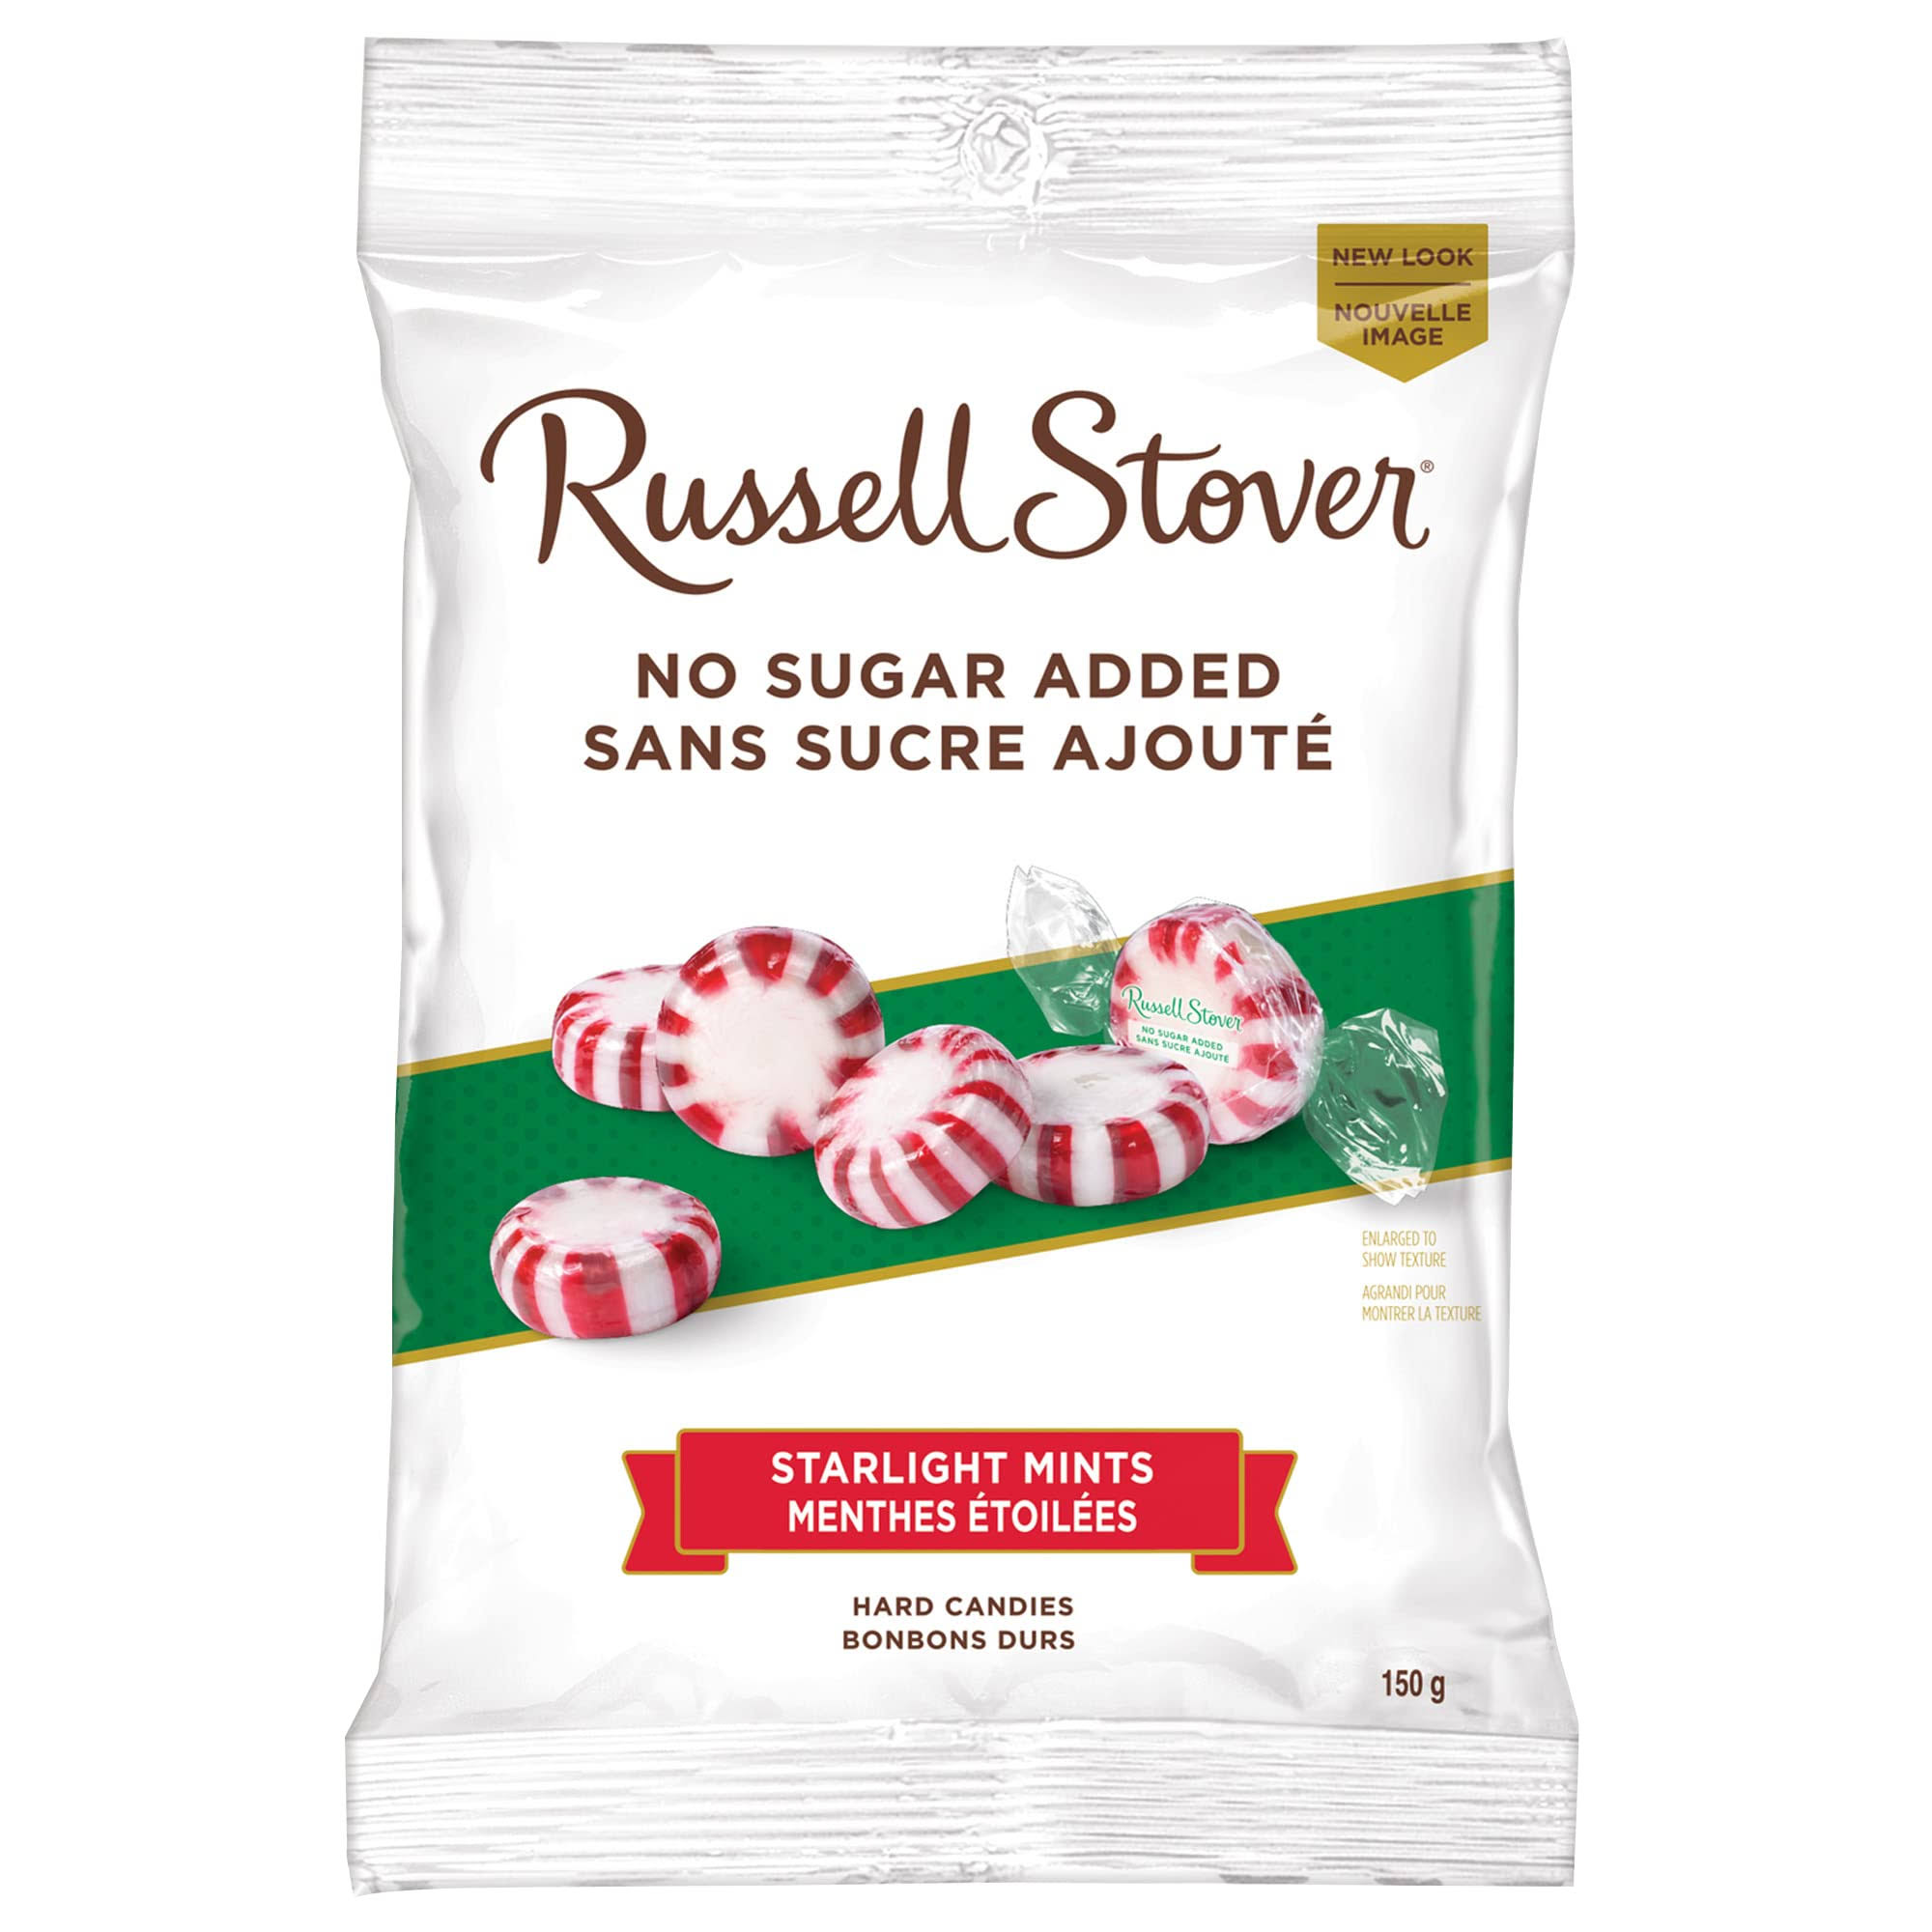 Russel Stover Starlight Mints Hard Candies - 150g